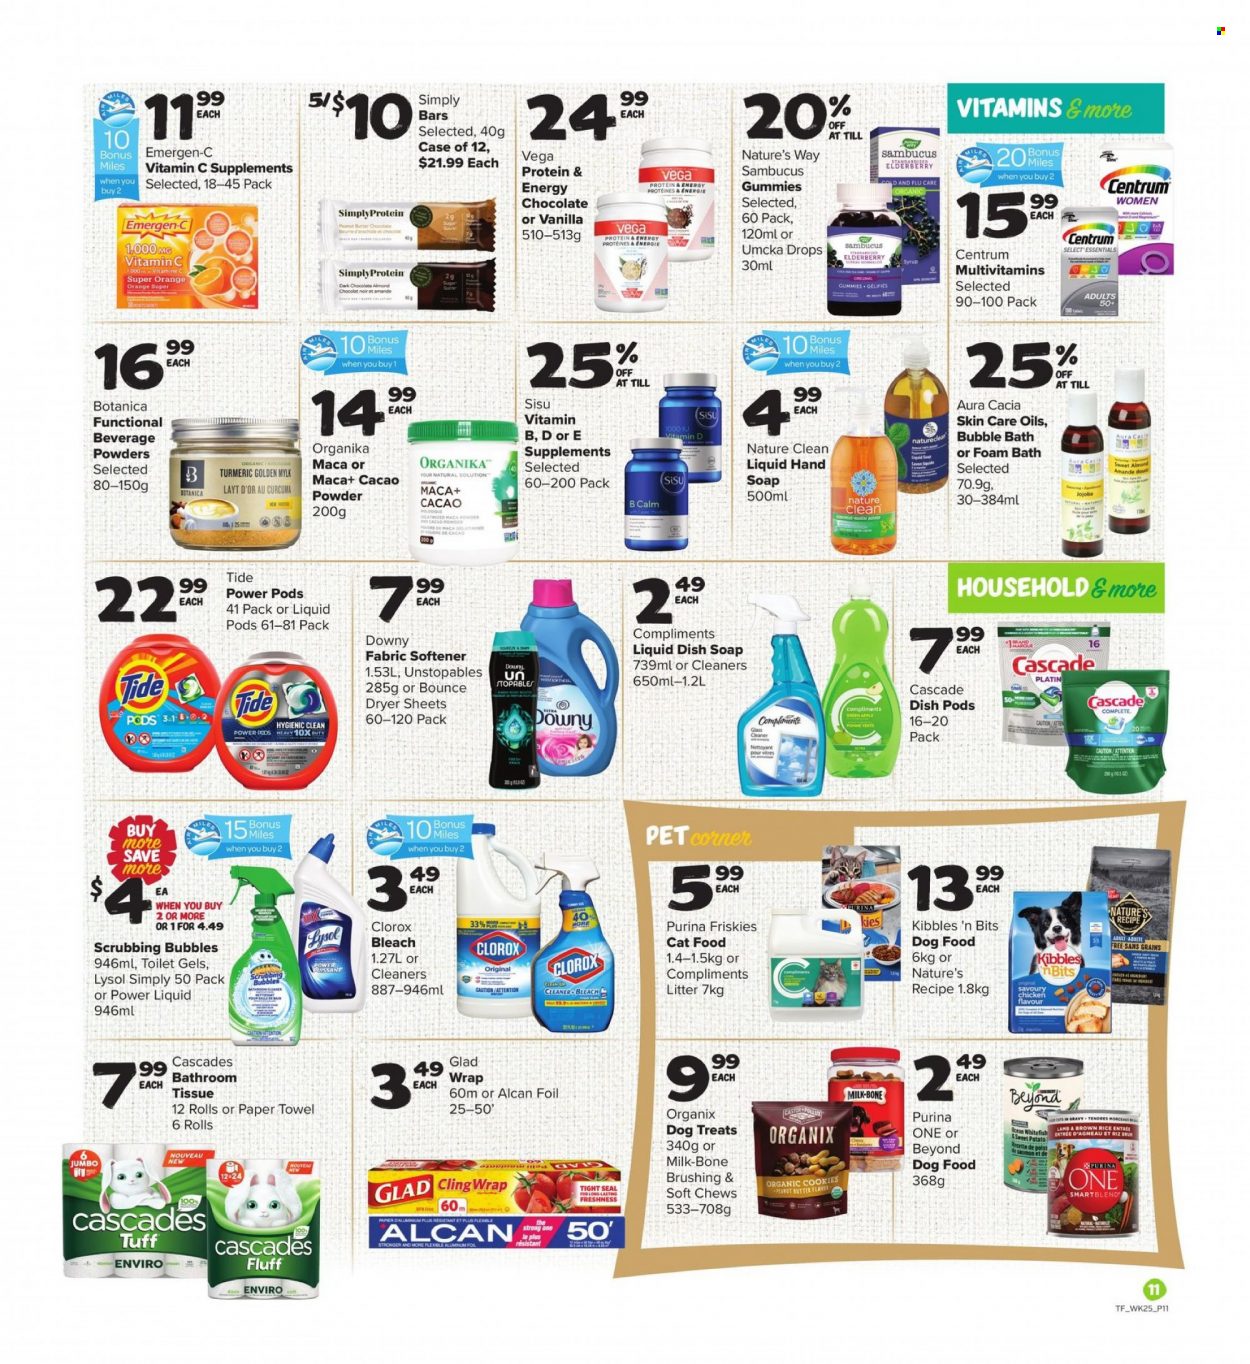 thumbnail - Thrifty Foods Flyer - October 14, 2021 - October 20, 2021 - Sales products - sweet potato, milk, cookies, chocolate, chewing gum, dark chocolate, sugar, brown rice, rice, turmeric, peanut butter, syrup, tissues, paper towels, Scrubbing Bubbles, cleaner, bleach, Lysol, Clorox, Tide, Unstopables, fabric softener, Bounce, Cascade, dryer sheets, Downy Laundry, bubble bath, hand soap, bath foam, soap, multivitamin, vitamin c, Emergen-C, Centrum, oranges. Page 11.